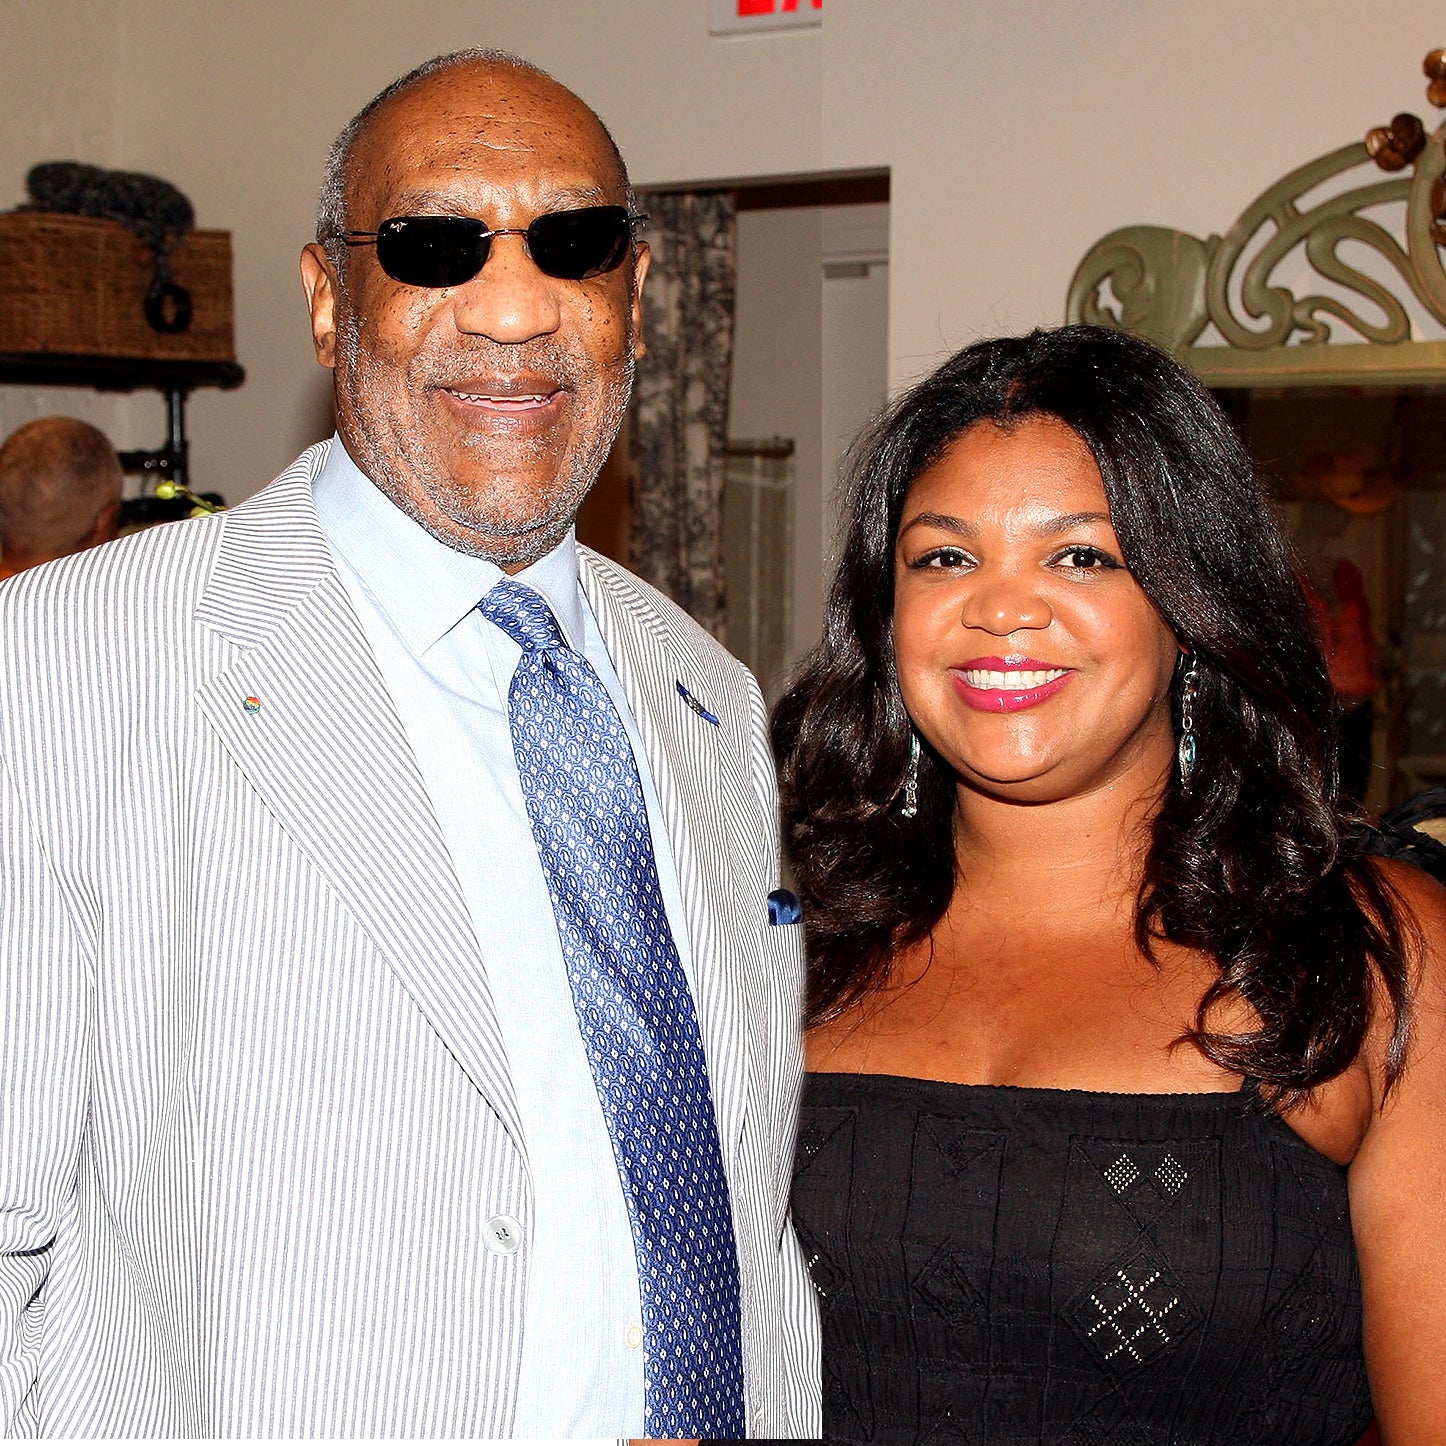 Bill Cosby Says He's Blind, While Daughter Defends Him In Essay: He 'Loves And Respects Women'
